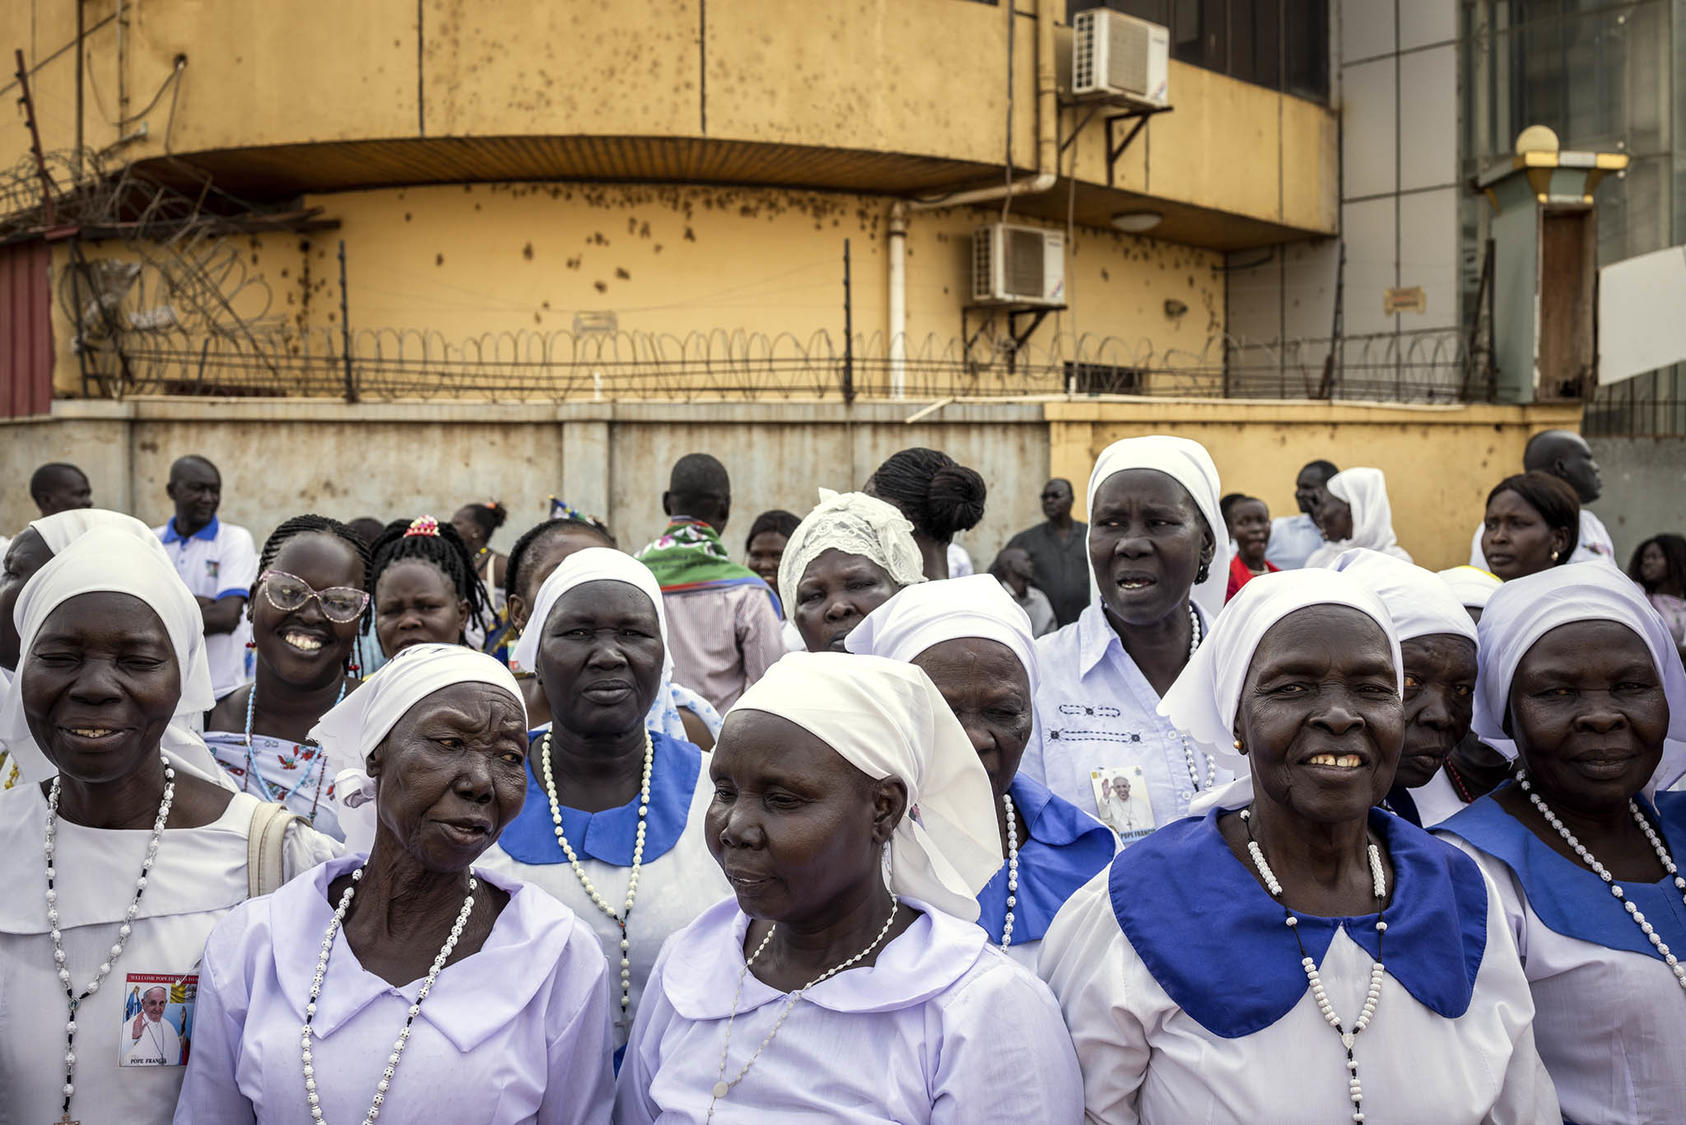 Nuns gather outside the airport in Juba, South Sudan to welcome Pope Francis on Friday, Feb. 3, 2023. (Jim Huylebroek/The New York Times)